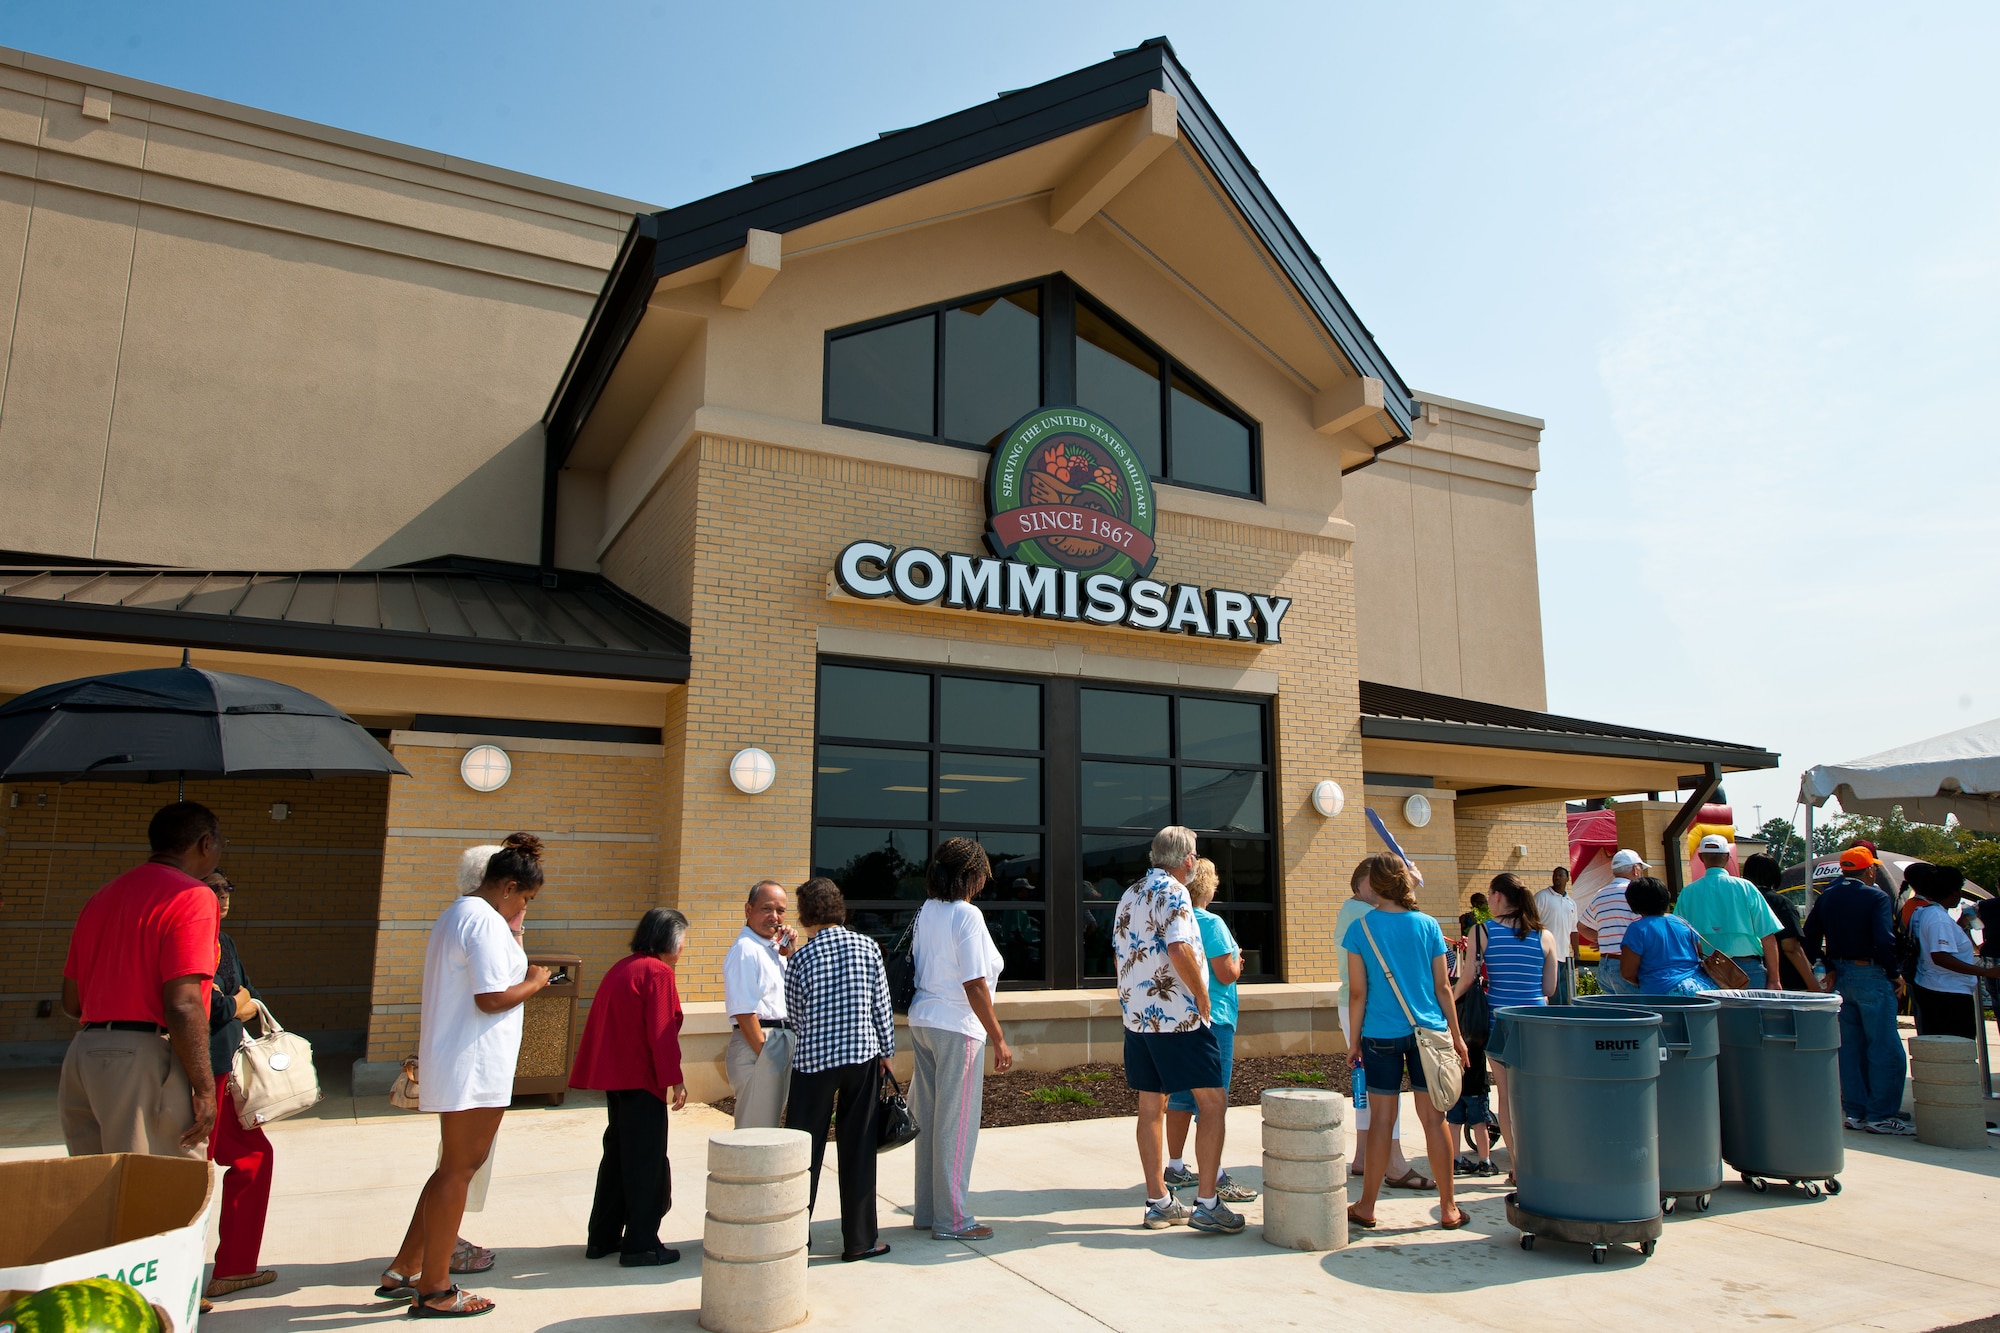 Patrons of the new Gunter-Annex commissary line-up to shop at the store’s grand opening Aug. 5, 2014. The commissary was approximately a year in the making and boasts a larger more energy efficient store than the previous commissary. At the grand opening people enjoyed free samples as well as giveaways including a $25 gift card for some. (U.S. Air Force photo by Donna L. Burnett) 